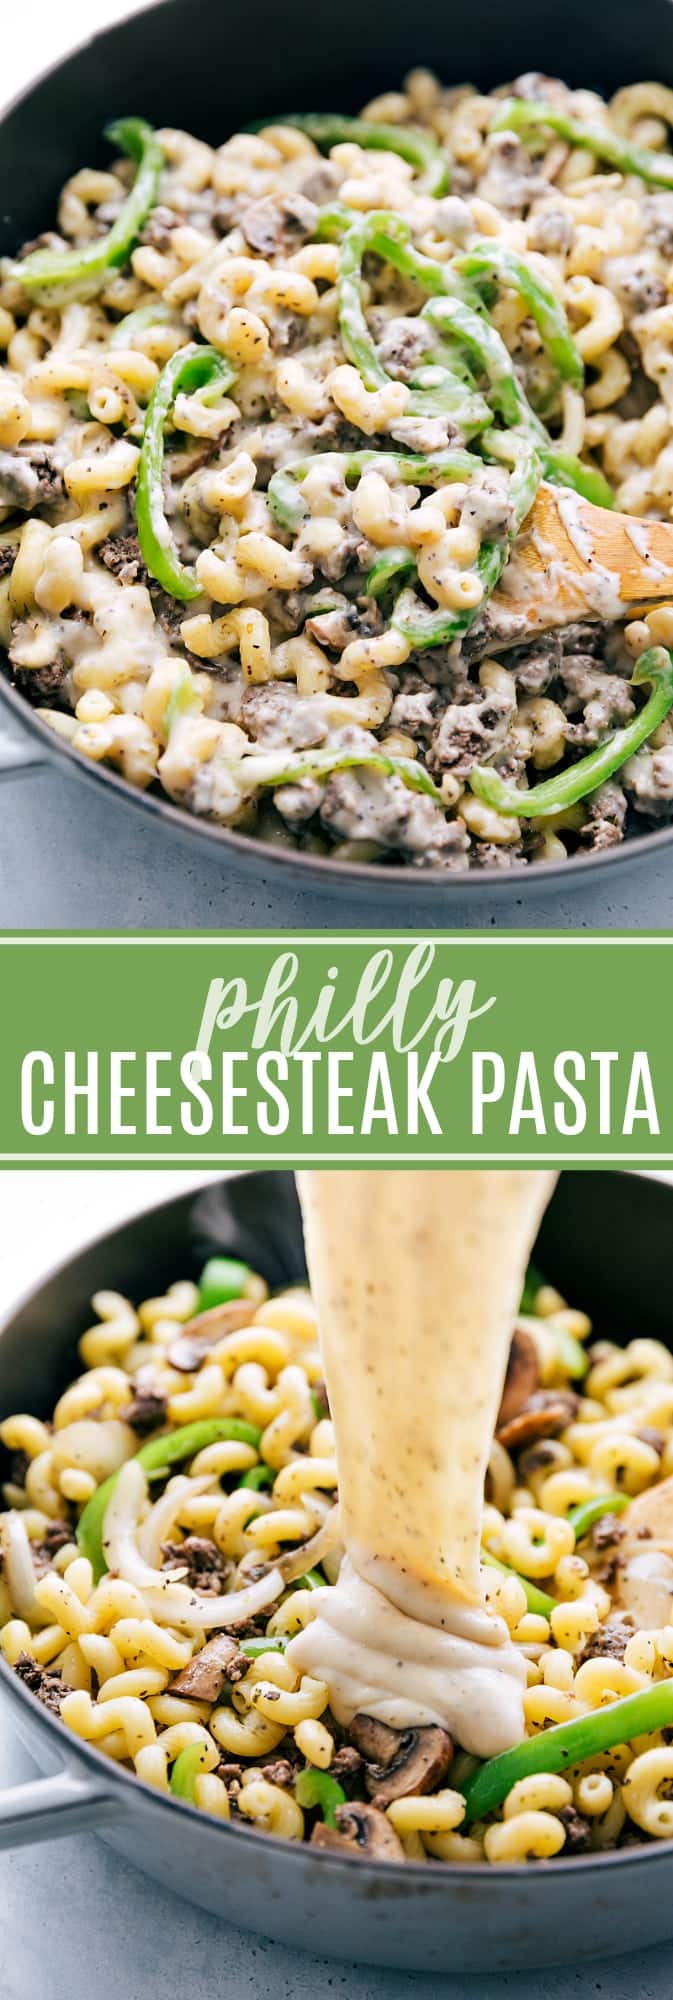 A delicious take on the flavors from the famous philly cheesesteak sandwich -- transformed into a cheesy and comforting pasta dish! This philly cheesesteak pasta is sure to be a hit! via chelseasmessyapron.com #philly #cheesesteak #pasta #easy #quick #dinner #kidfriendly #onion #pepper